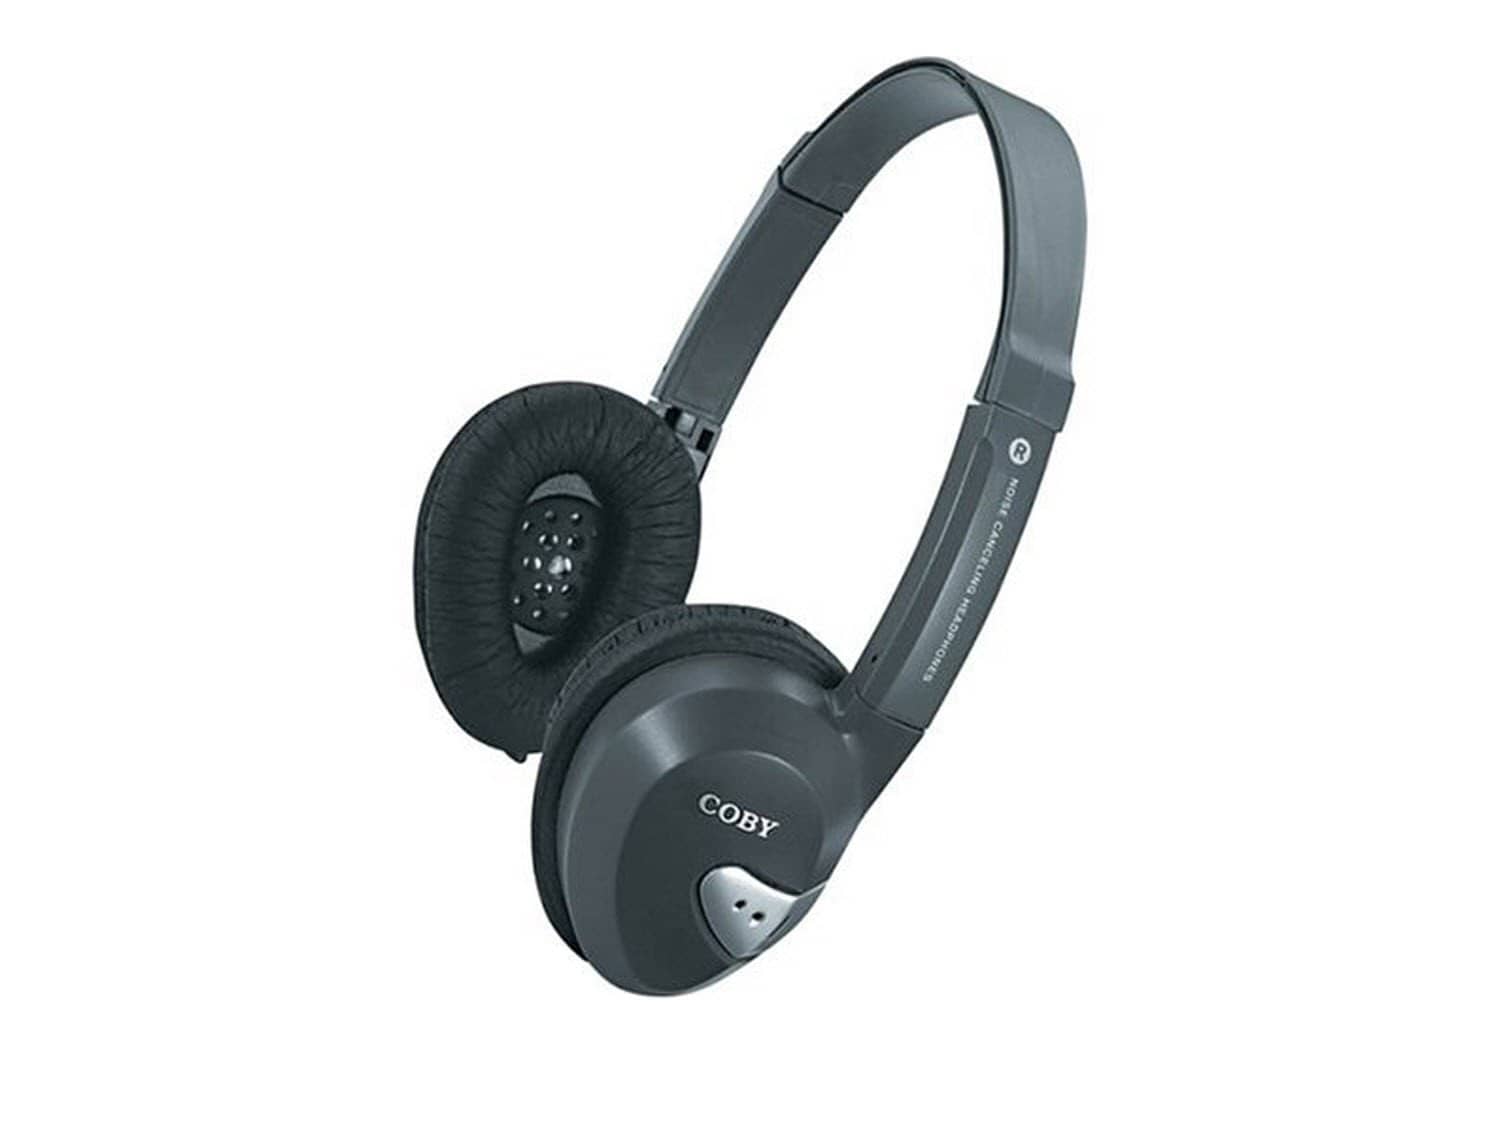 Coby CV190 Noise Cancellation Digital Stereo HP